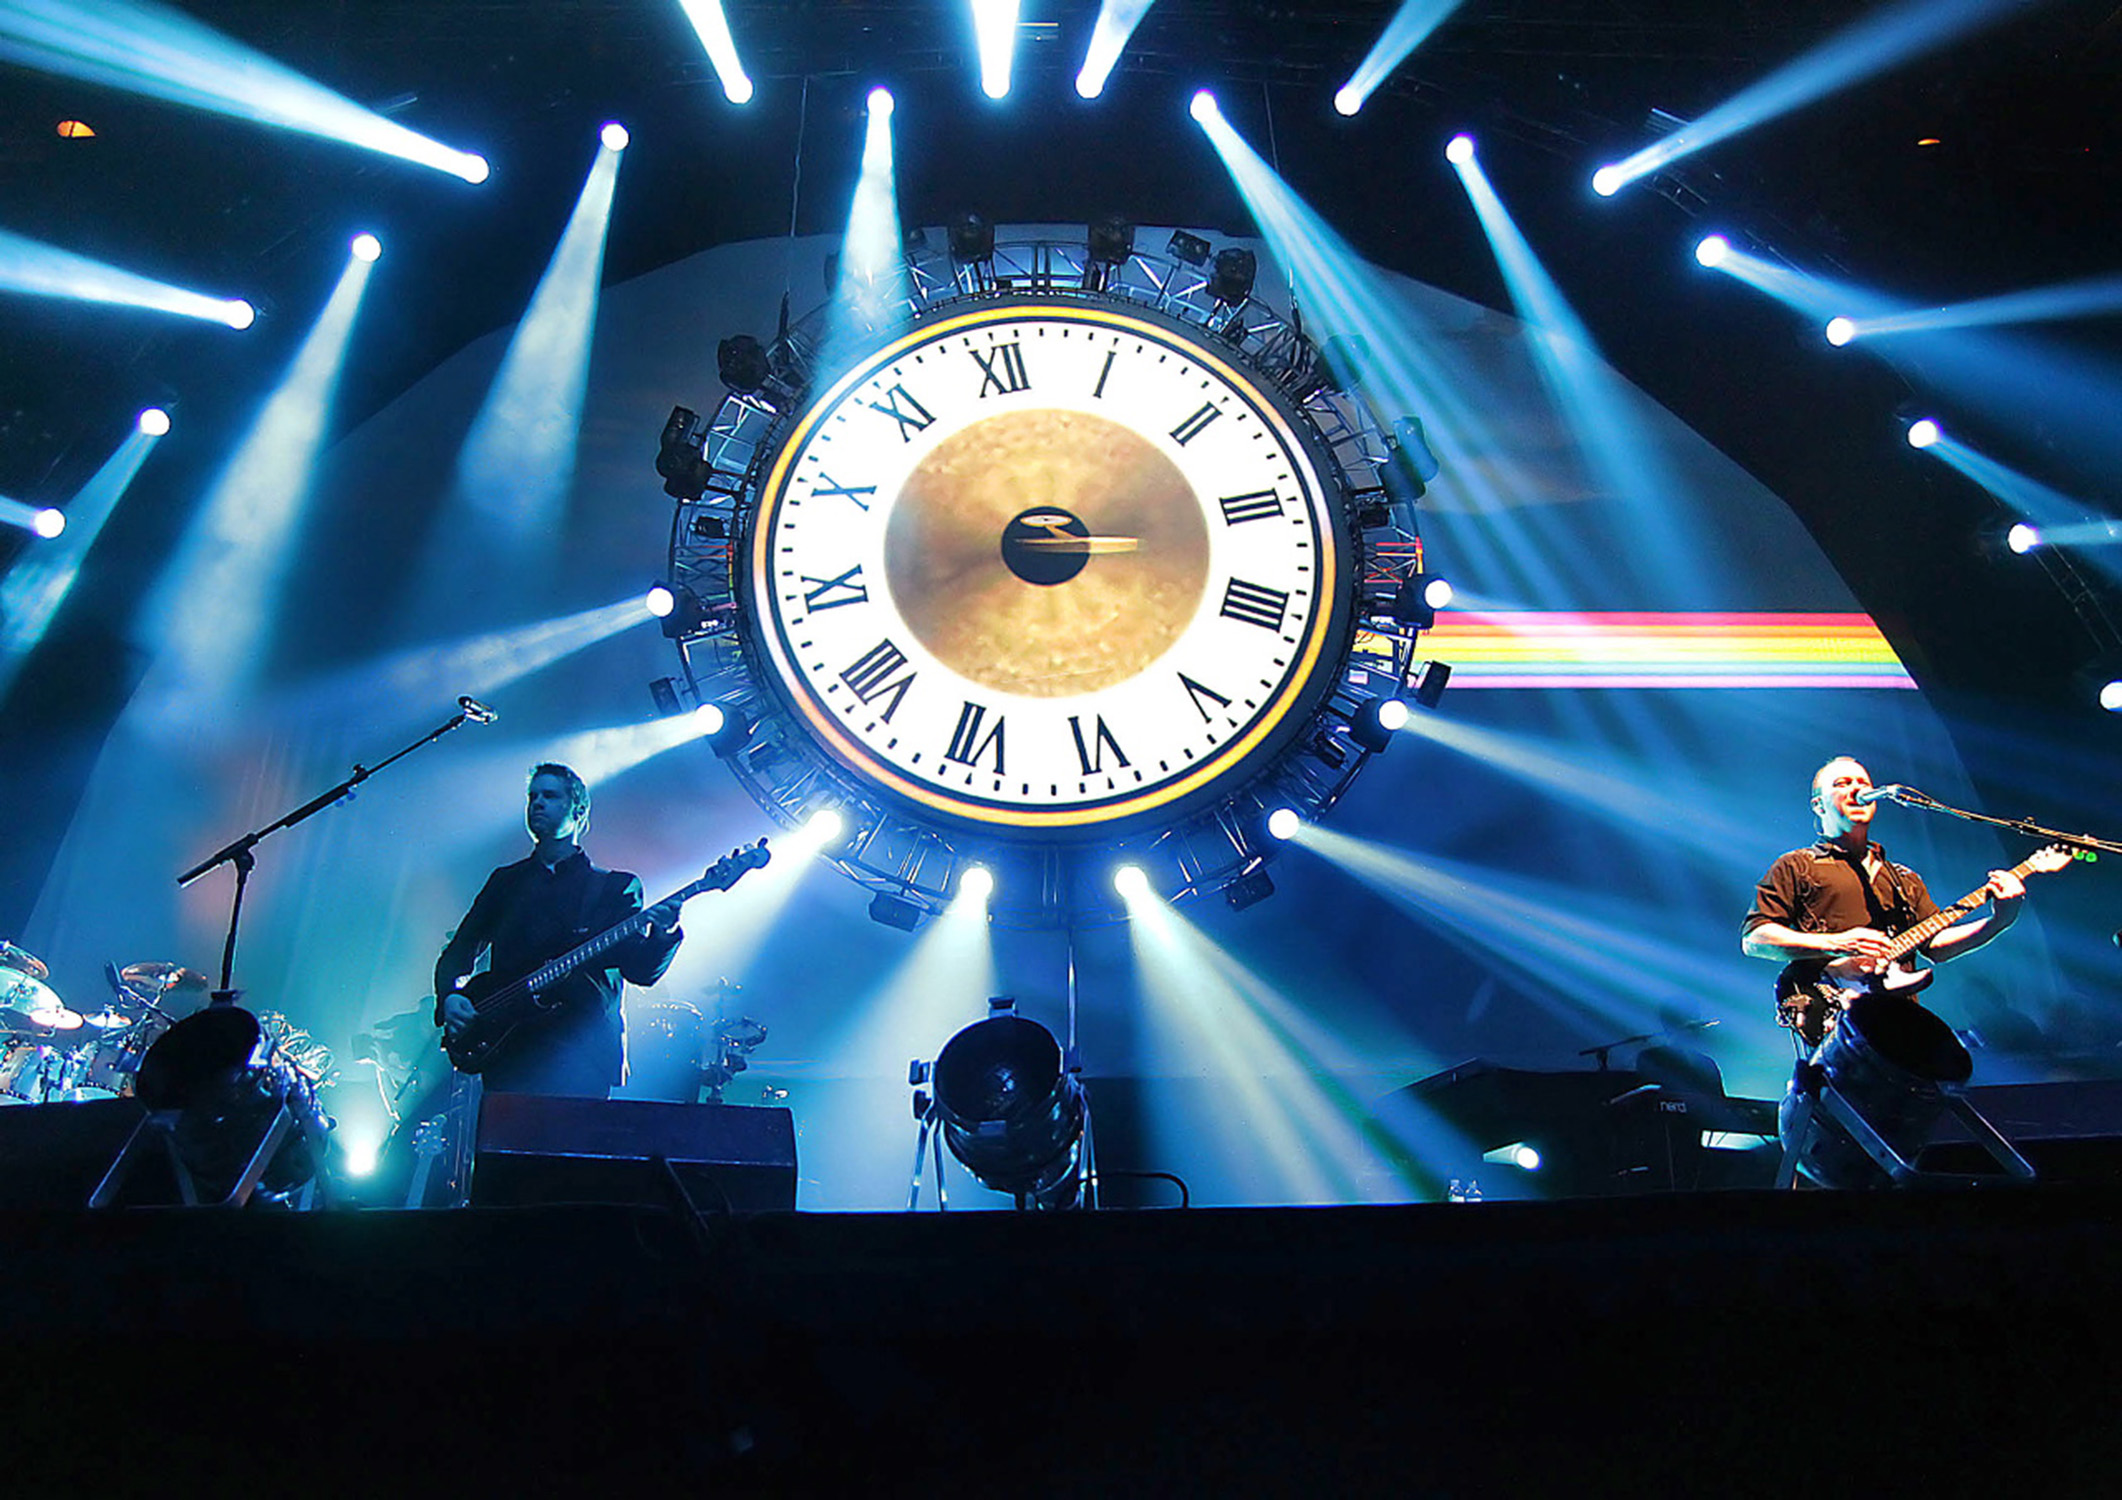 Brit Floyd World Tour 2019: 40 Years of The Wall | Visit Somerset County NJ